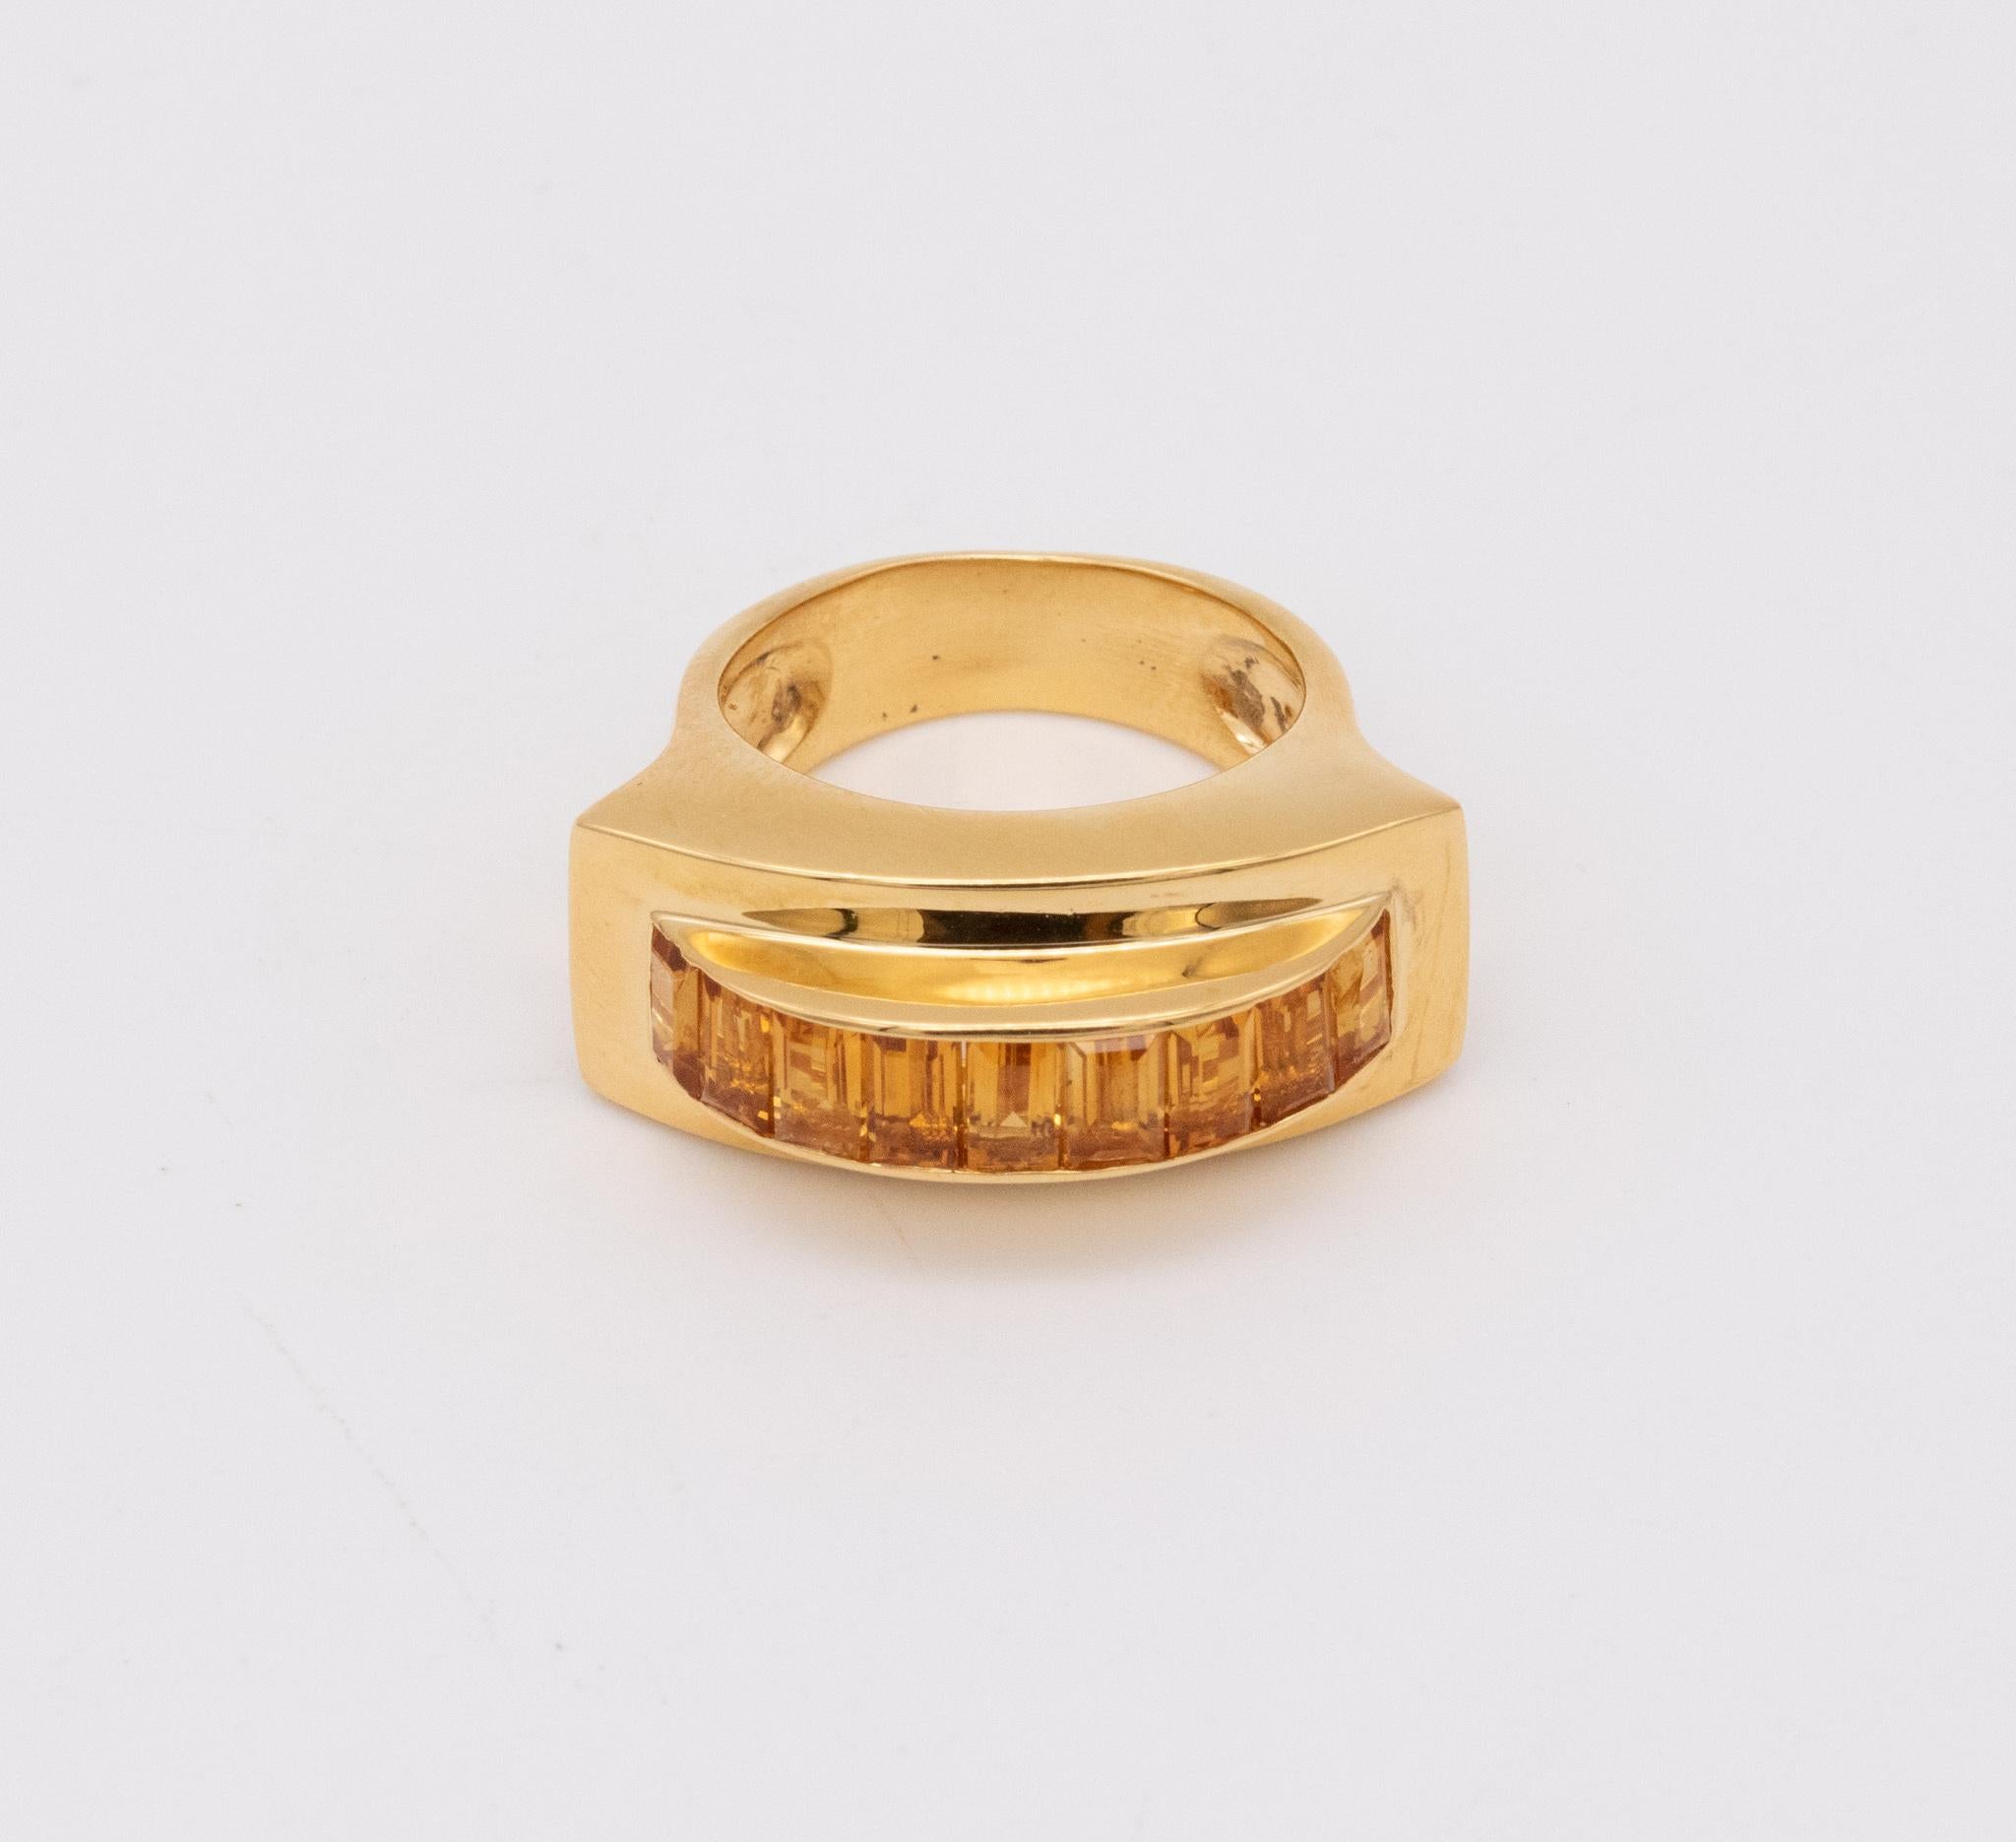 Art Deco 1940 American Geometric Tank Ring 18Kt Gold 4.5 Cts Caliber Citrines For Sale 2